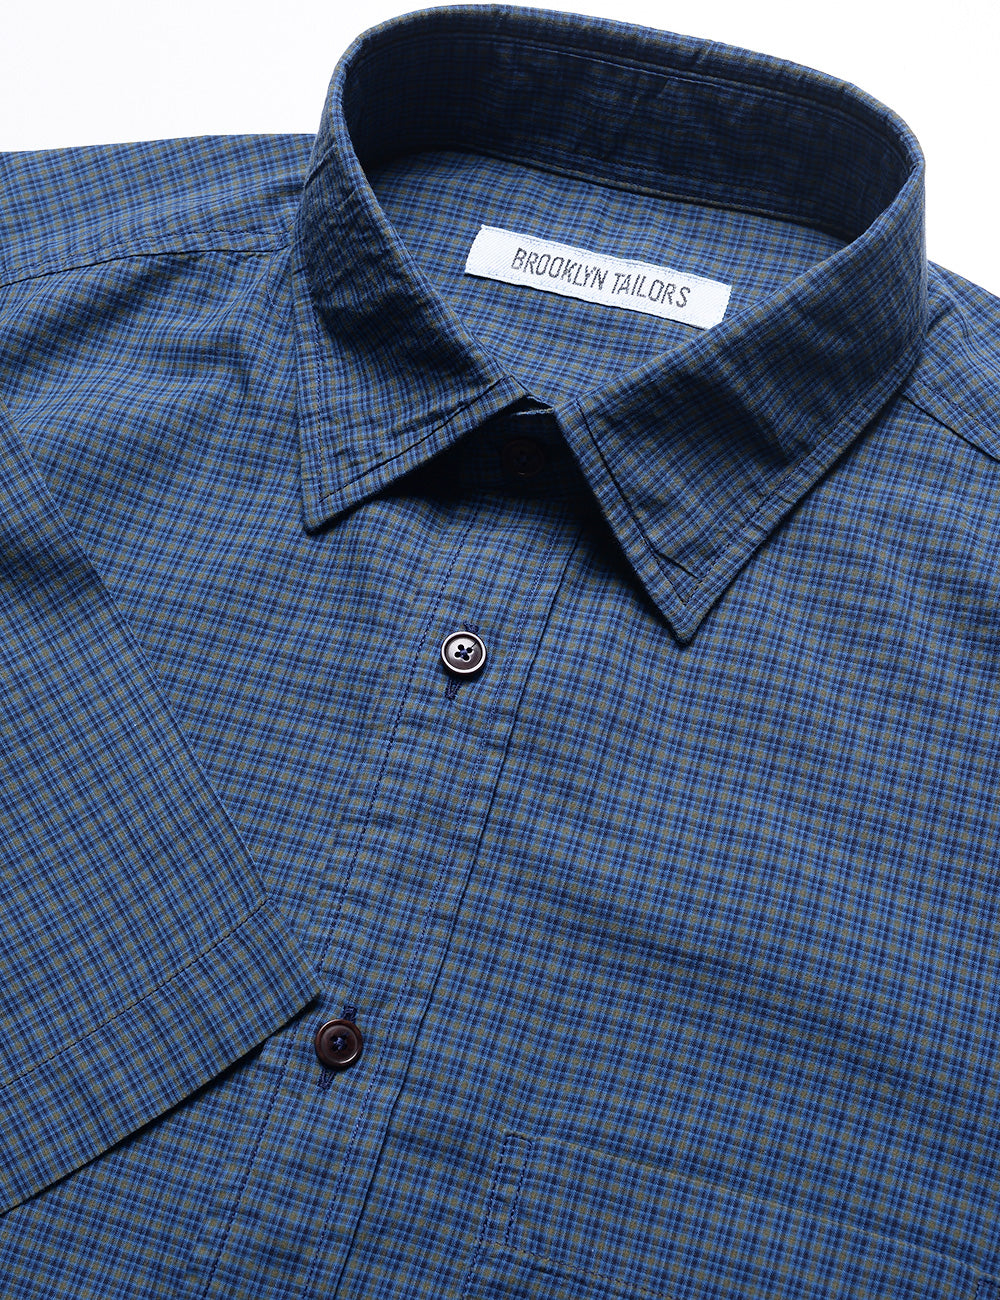 Detail of collar, buttons, and sleeve of Brooklyn Tailors BKT14 Casual Shirt in Washed Poplin - Skyline